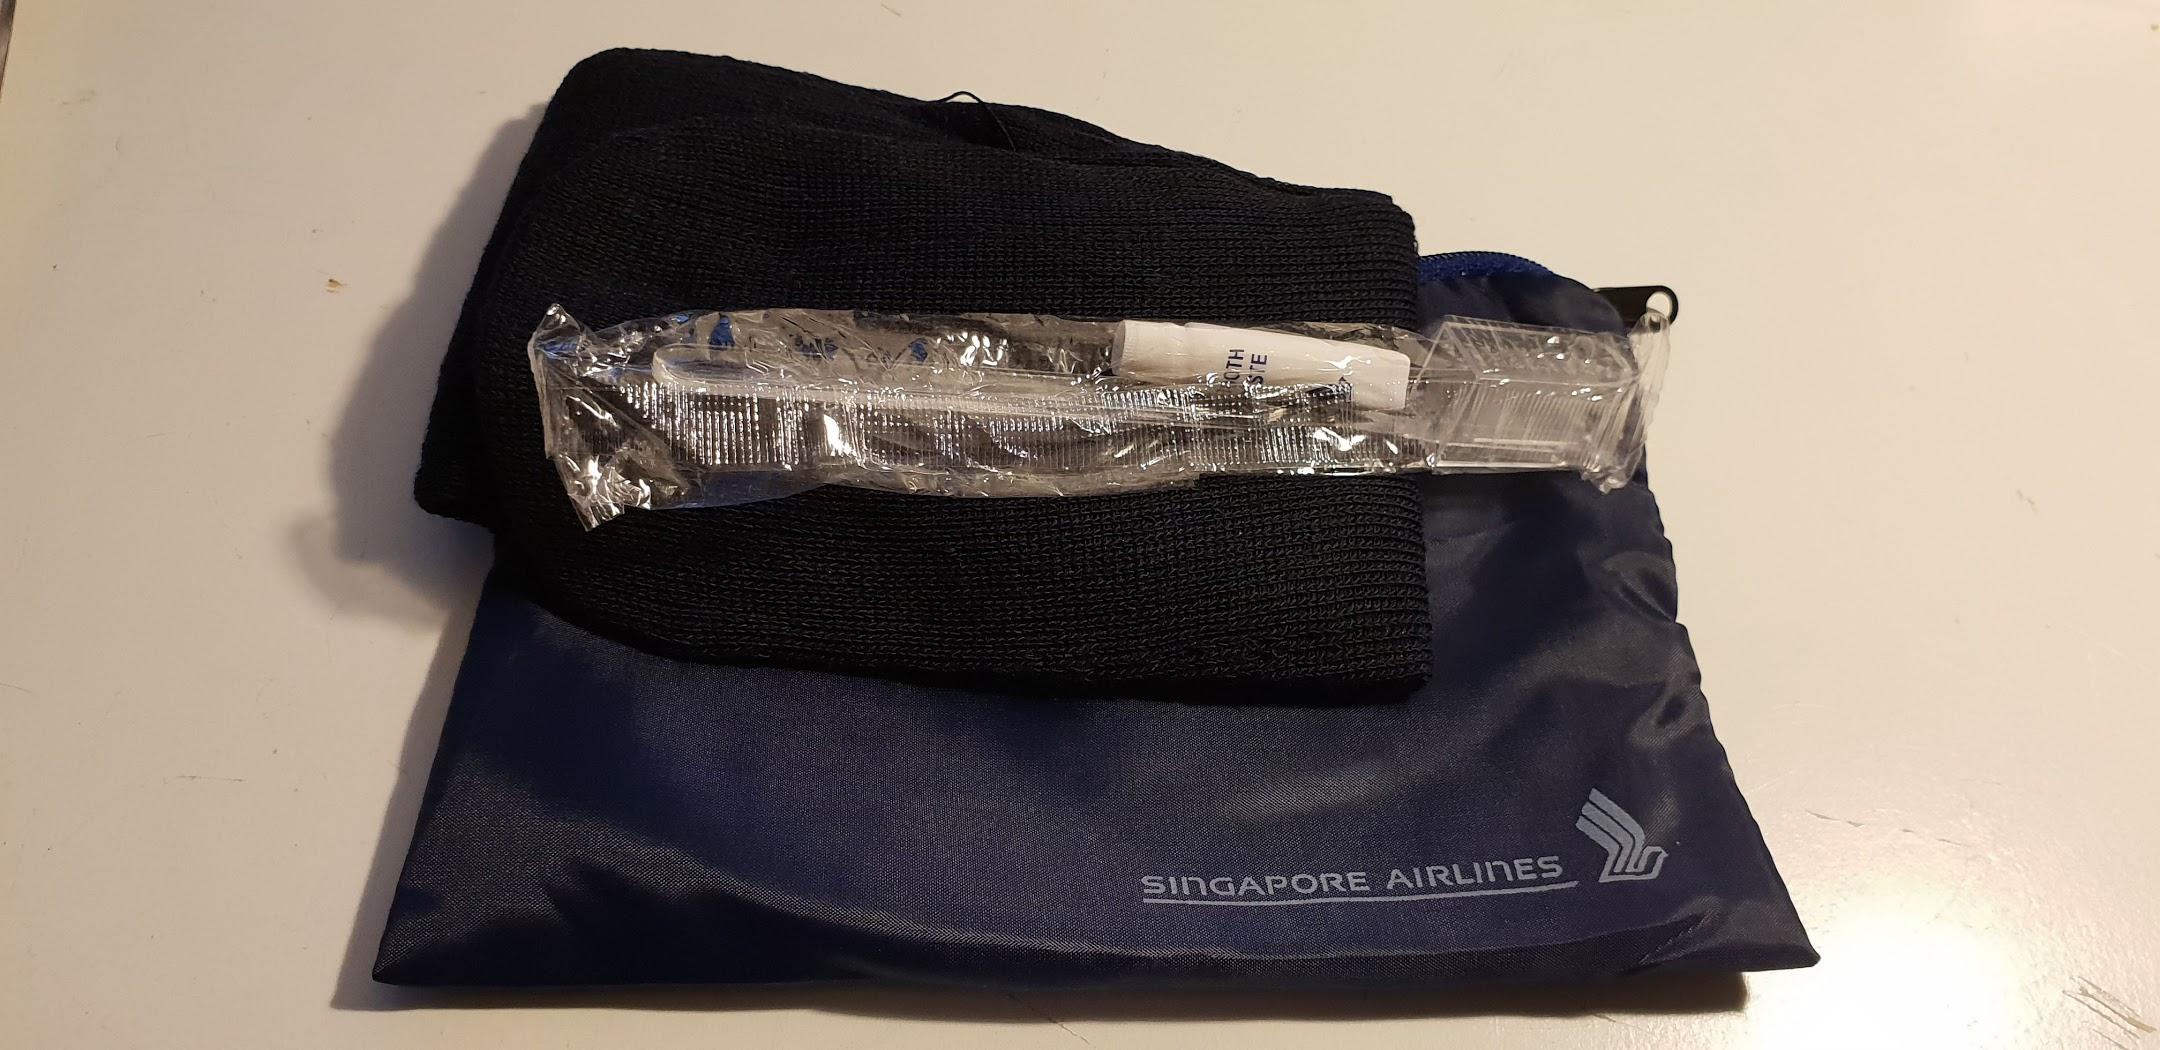 Singapore Airlines A350 Economy amenity kit